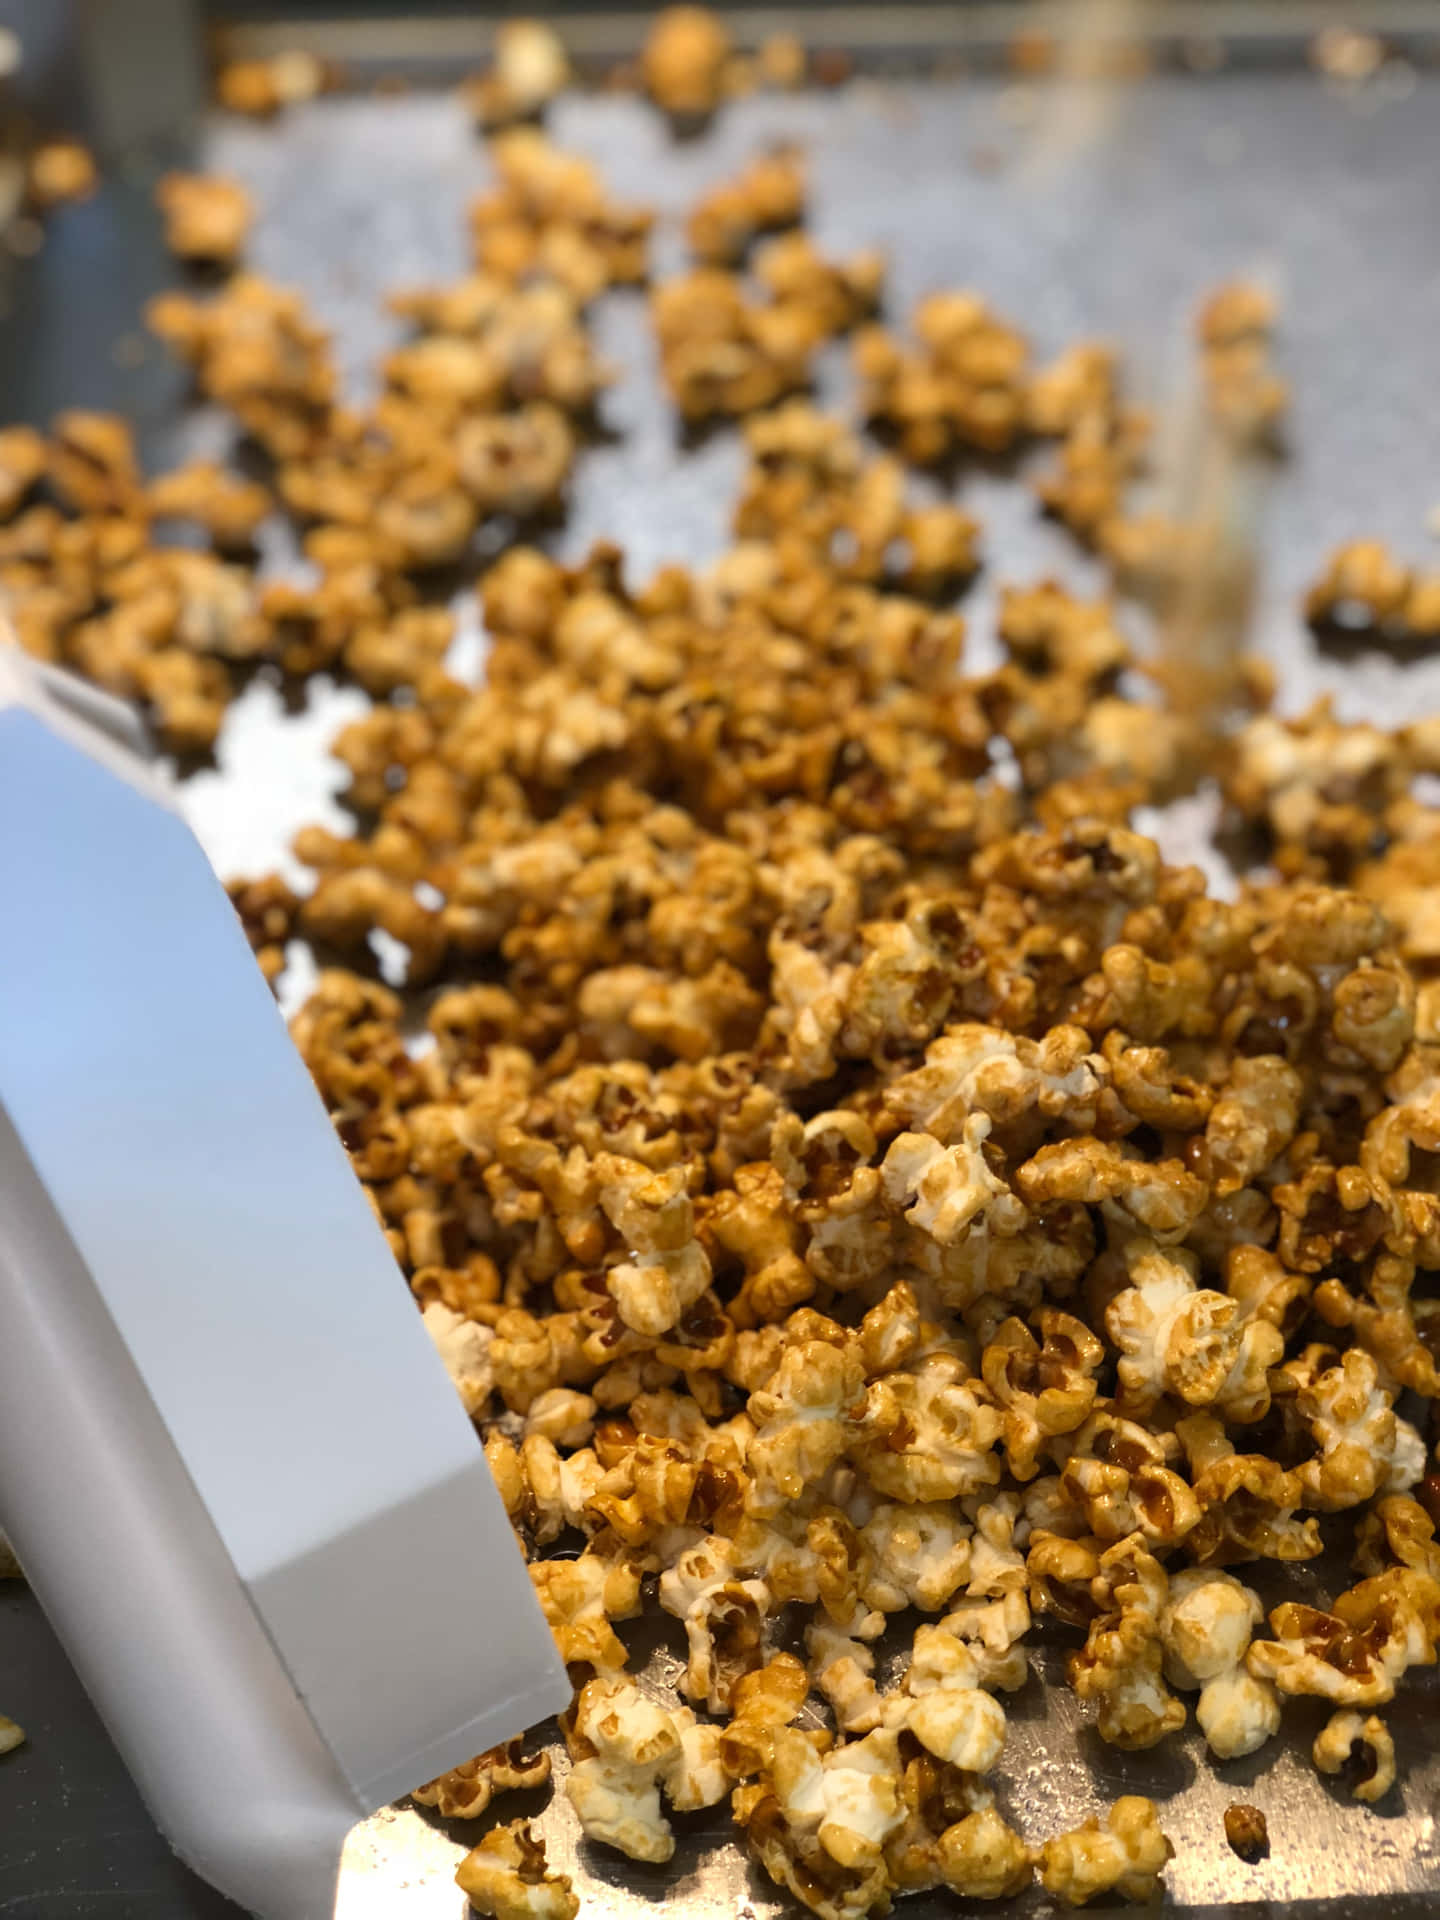 Popcorn Being Popped In A Machine